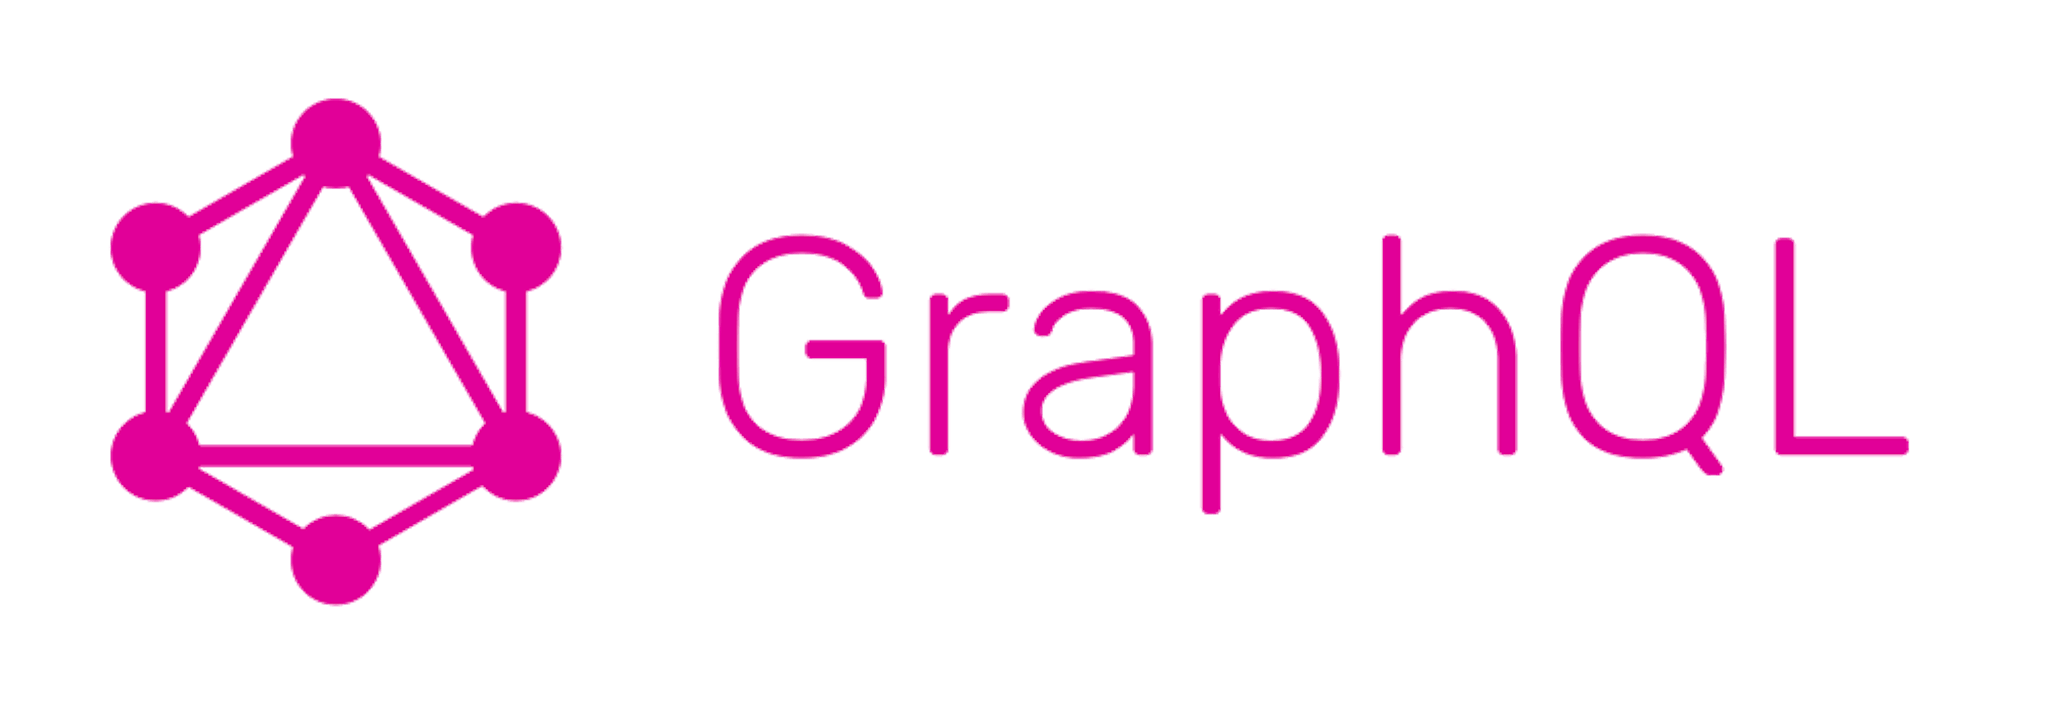 featured image - Advanced querying with GraphQL and Express